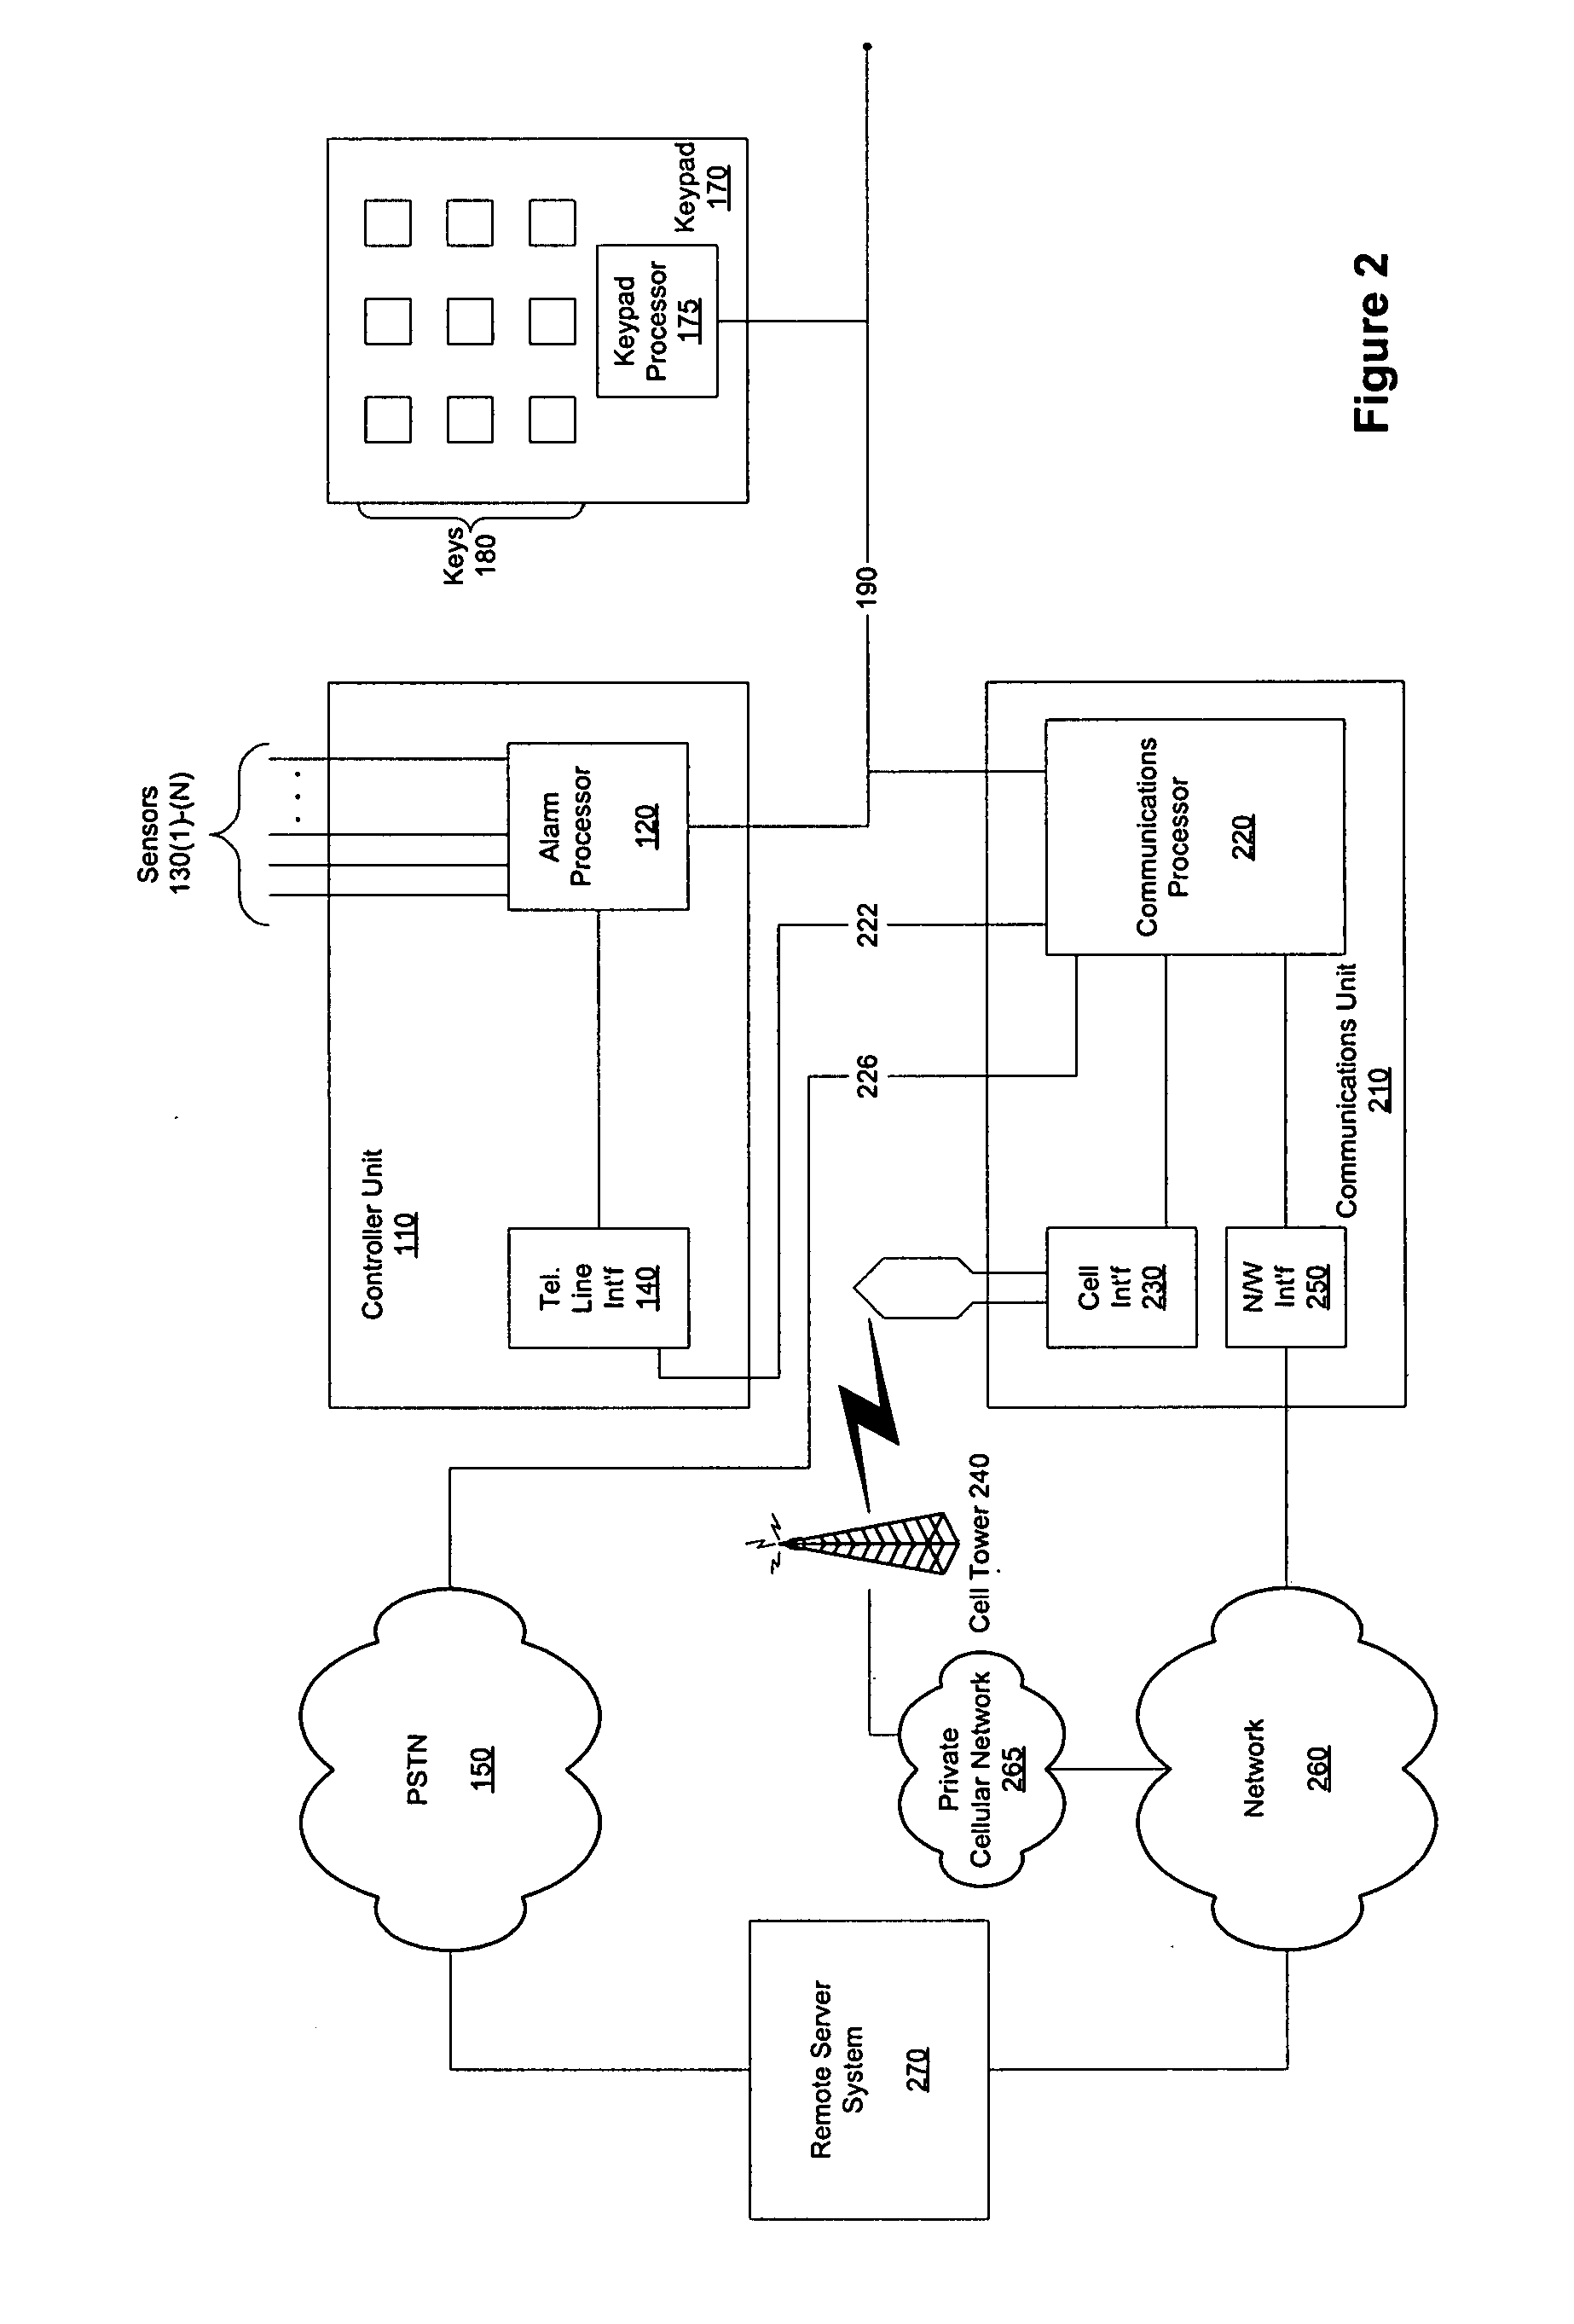 Method and system for coupling an alarm system to an external network